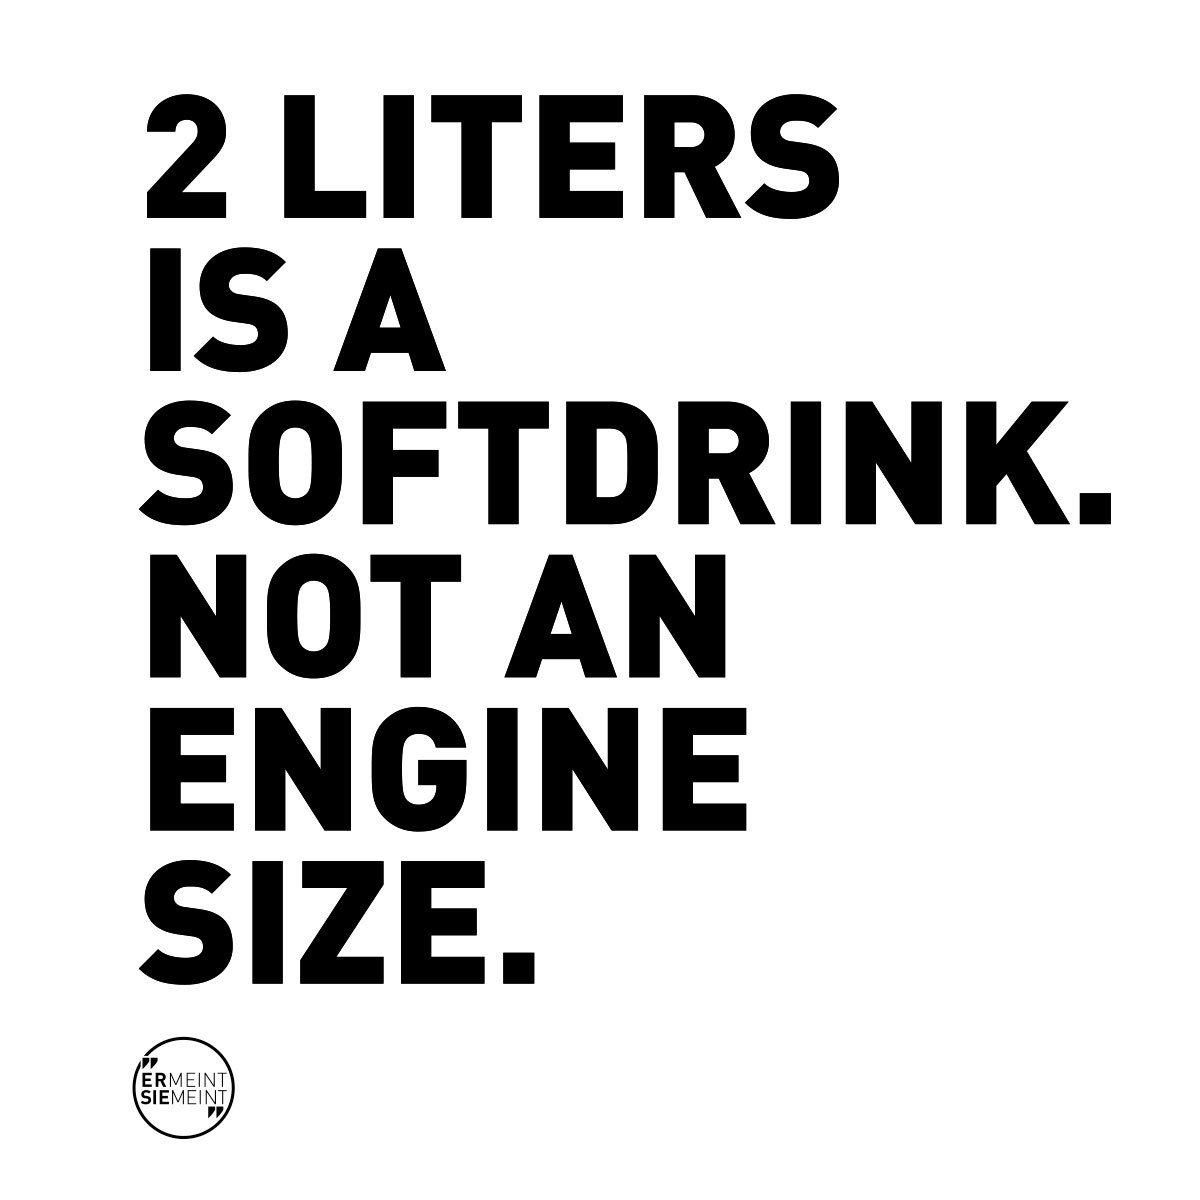 2 liters is a softdrink not an engine size